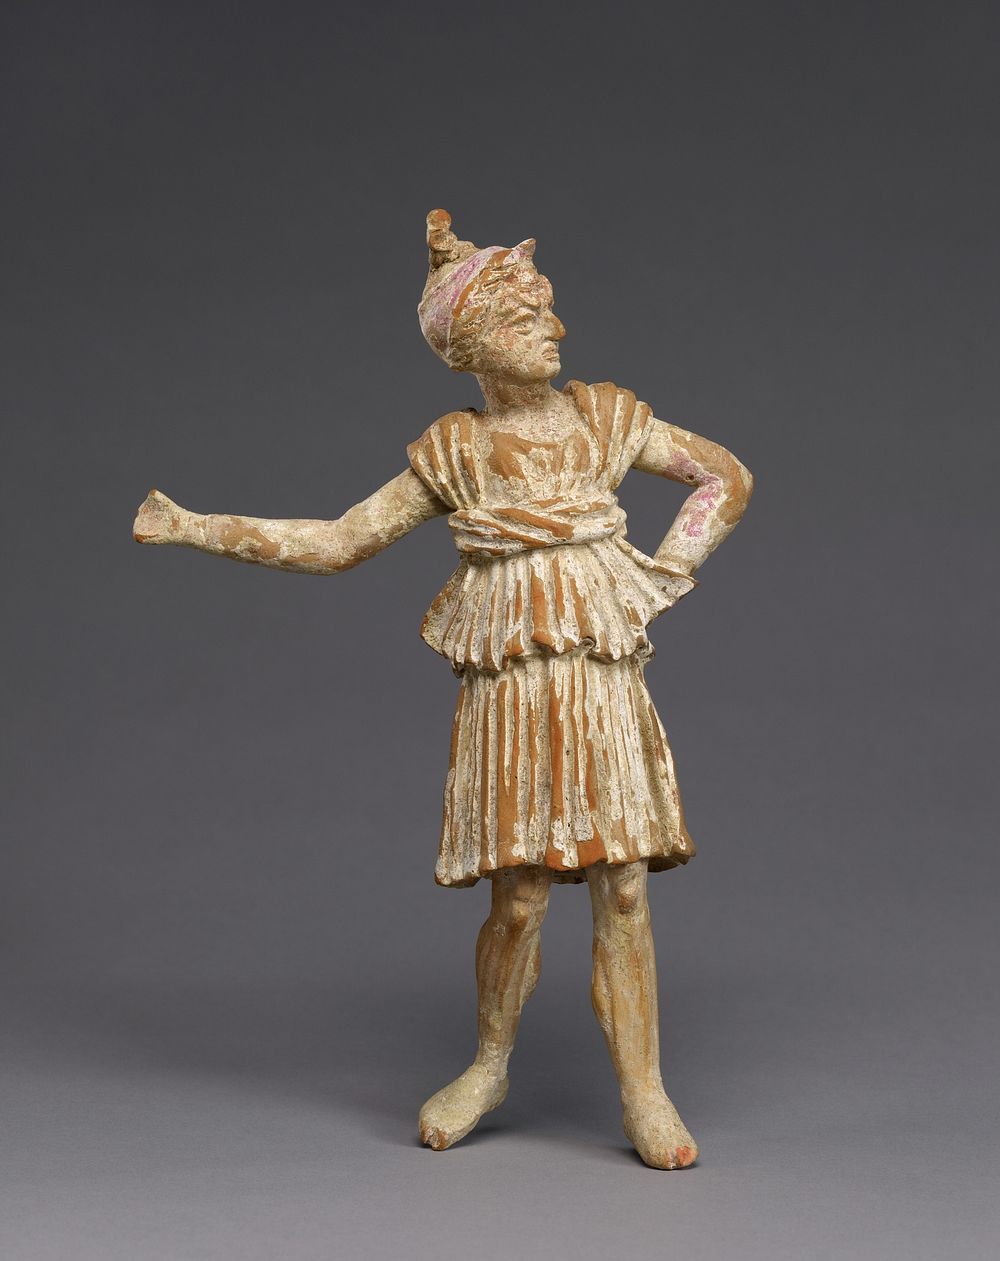 Statuette of a Mime